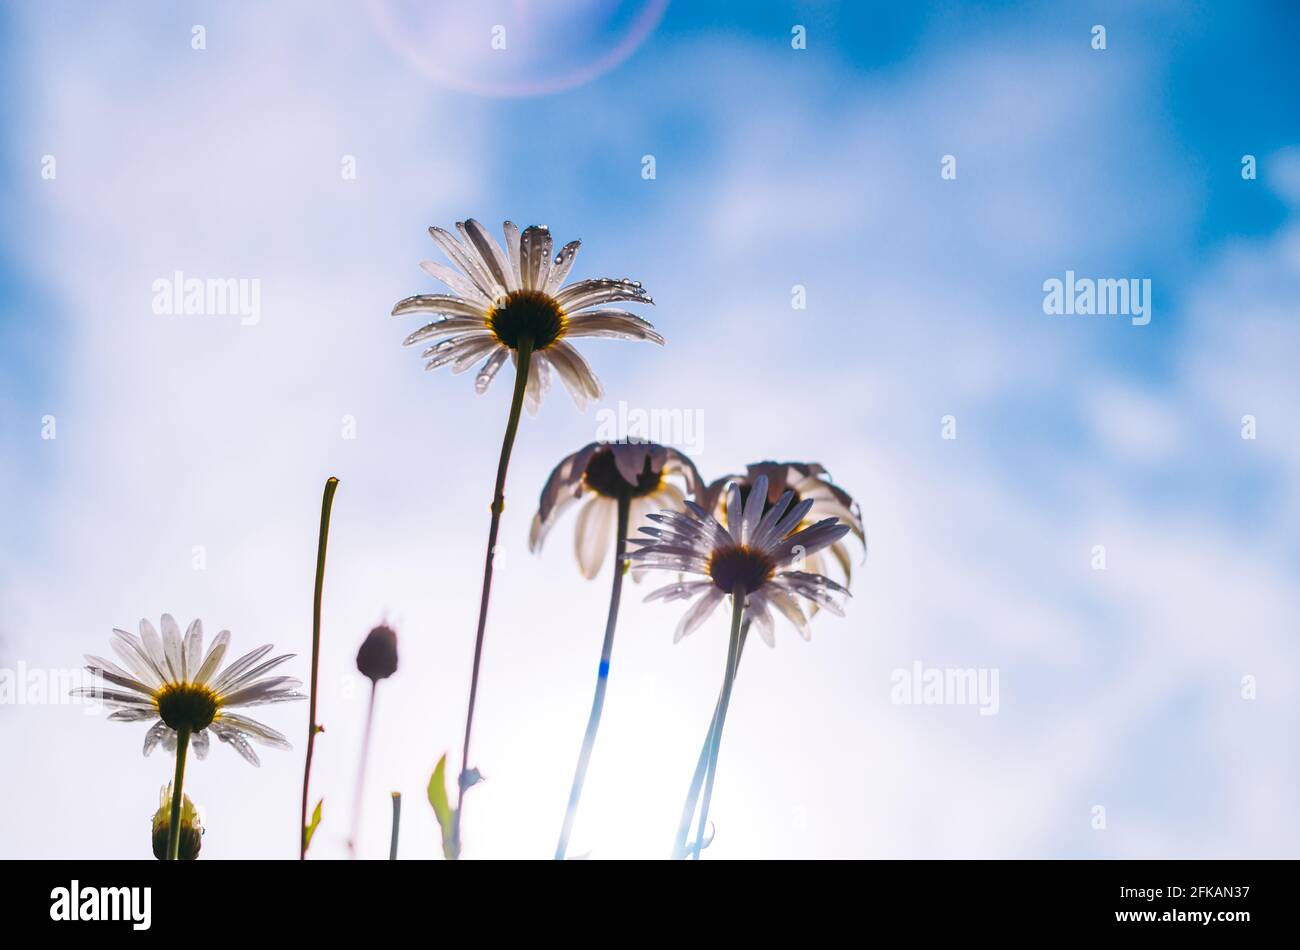 Many white daisy flowers standing tall against the blue sky, view from underneath the flowers, low angle photograph. bright sunlight penetrate the flo Stock Photo